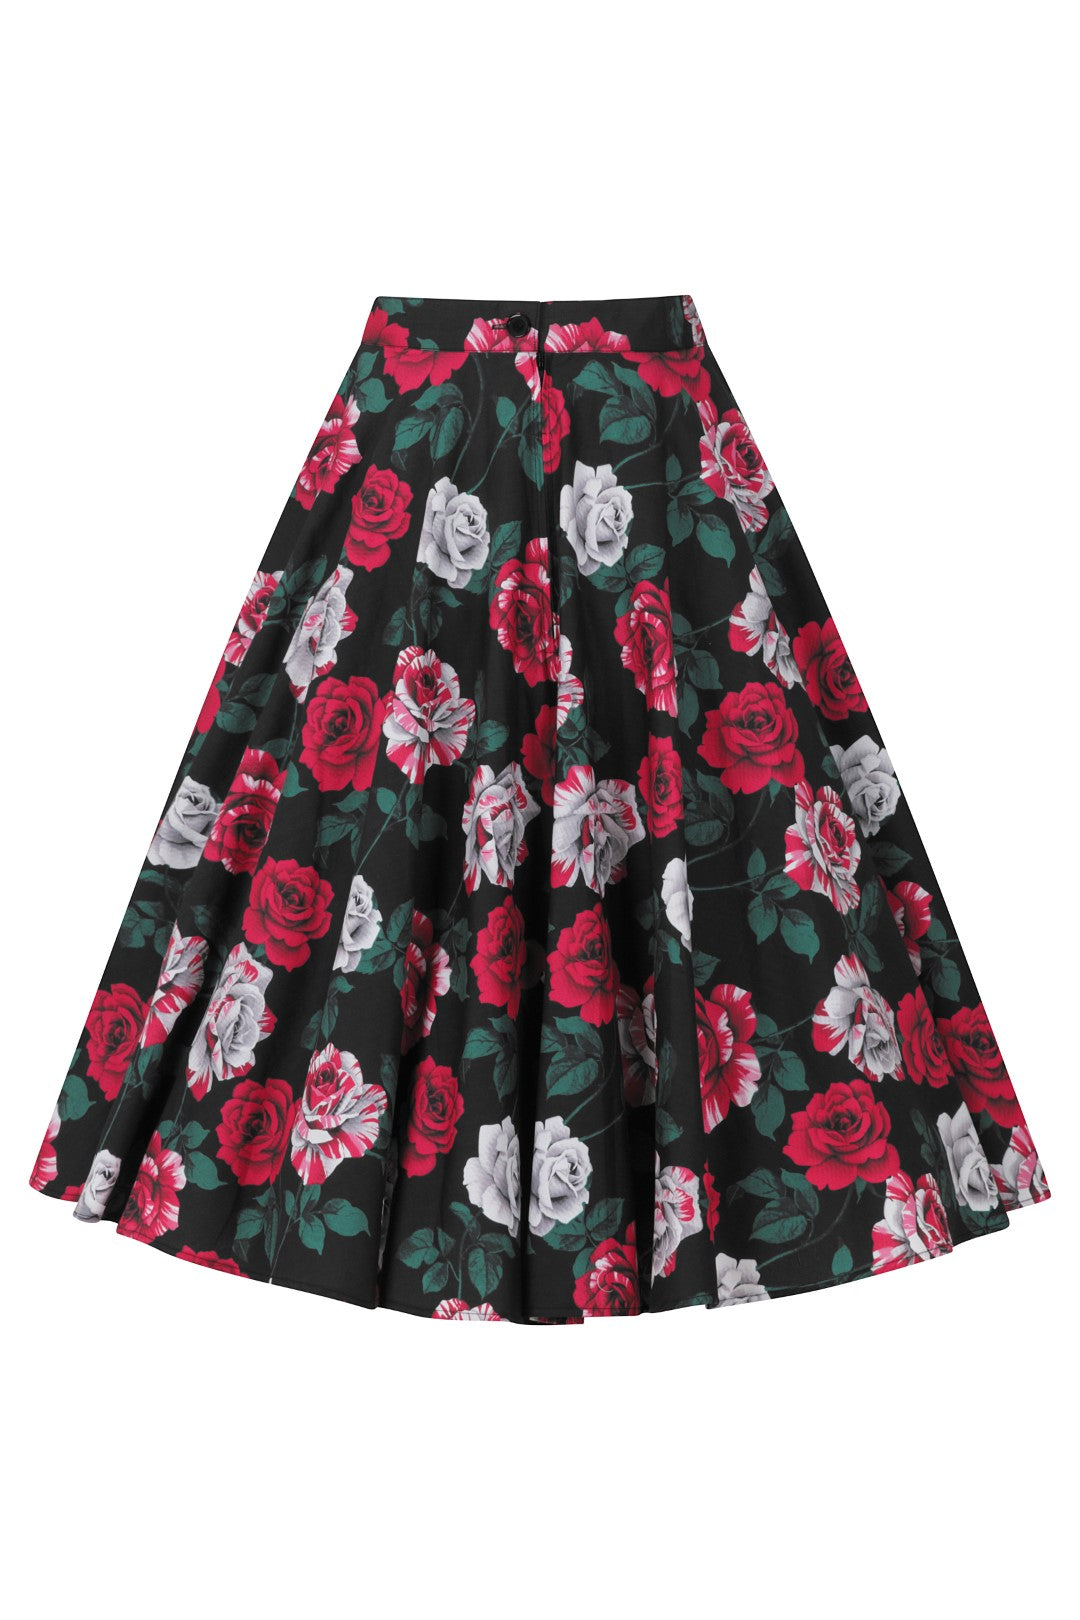 Ruby 50s Skirt by Hell Bunny